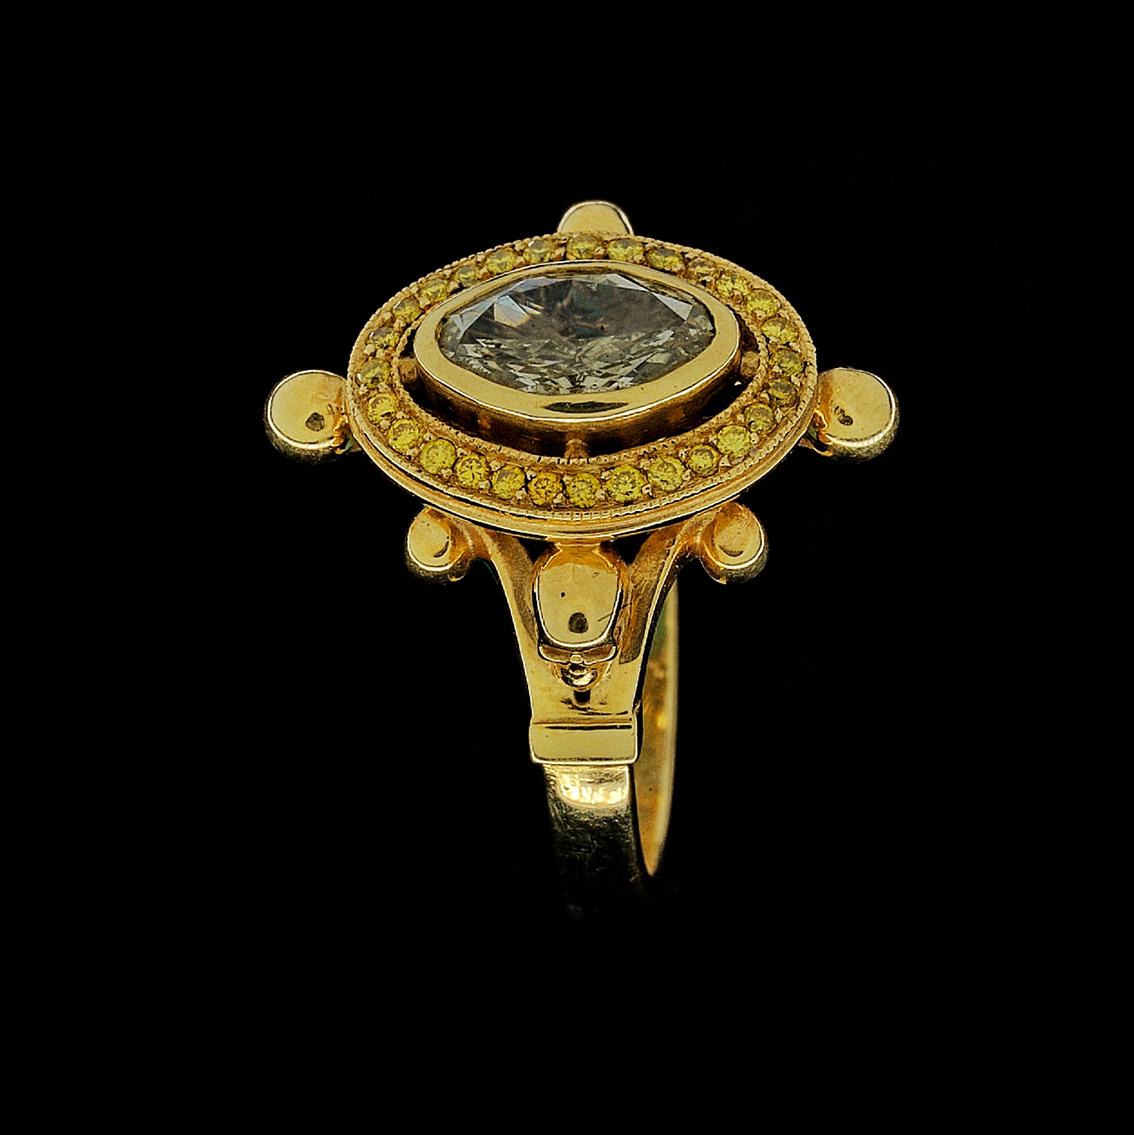 This 18kt yellow gold ring with diamonds and skulls is dark opulence at it's finest. 

This high fashion gothic statement ring is handmade in 18kt yellow gold, featuring a central bezel set oval cut diamond, 1.02ct in weight, (8.91mm x 5.68mm) SI in